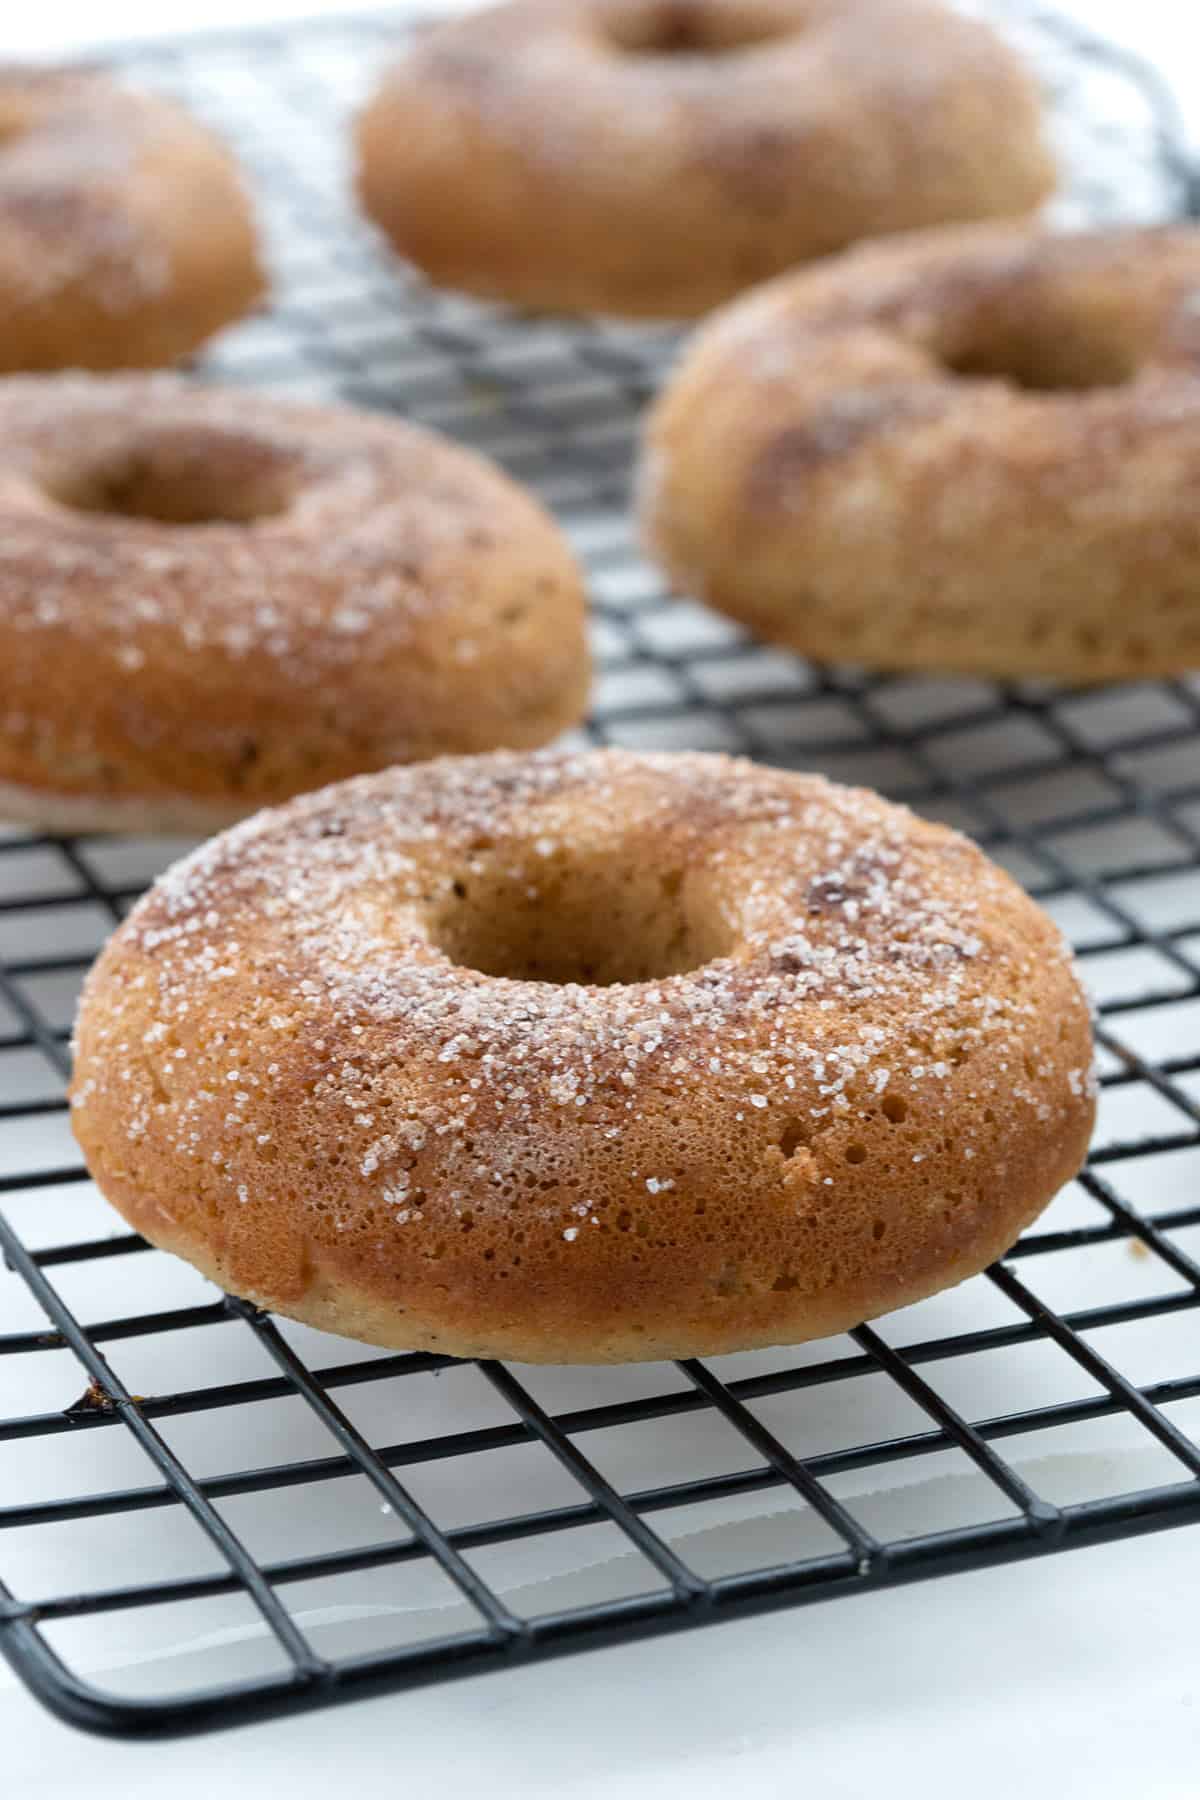 Keto almond flour donuts on a cooling rack.